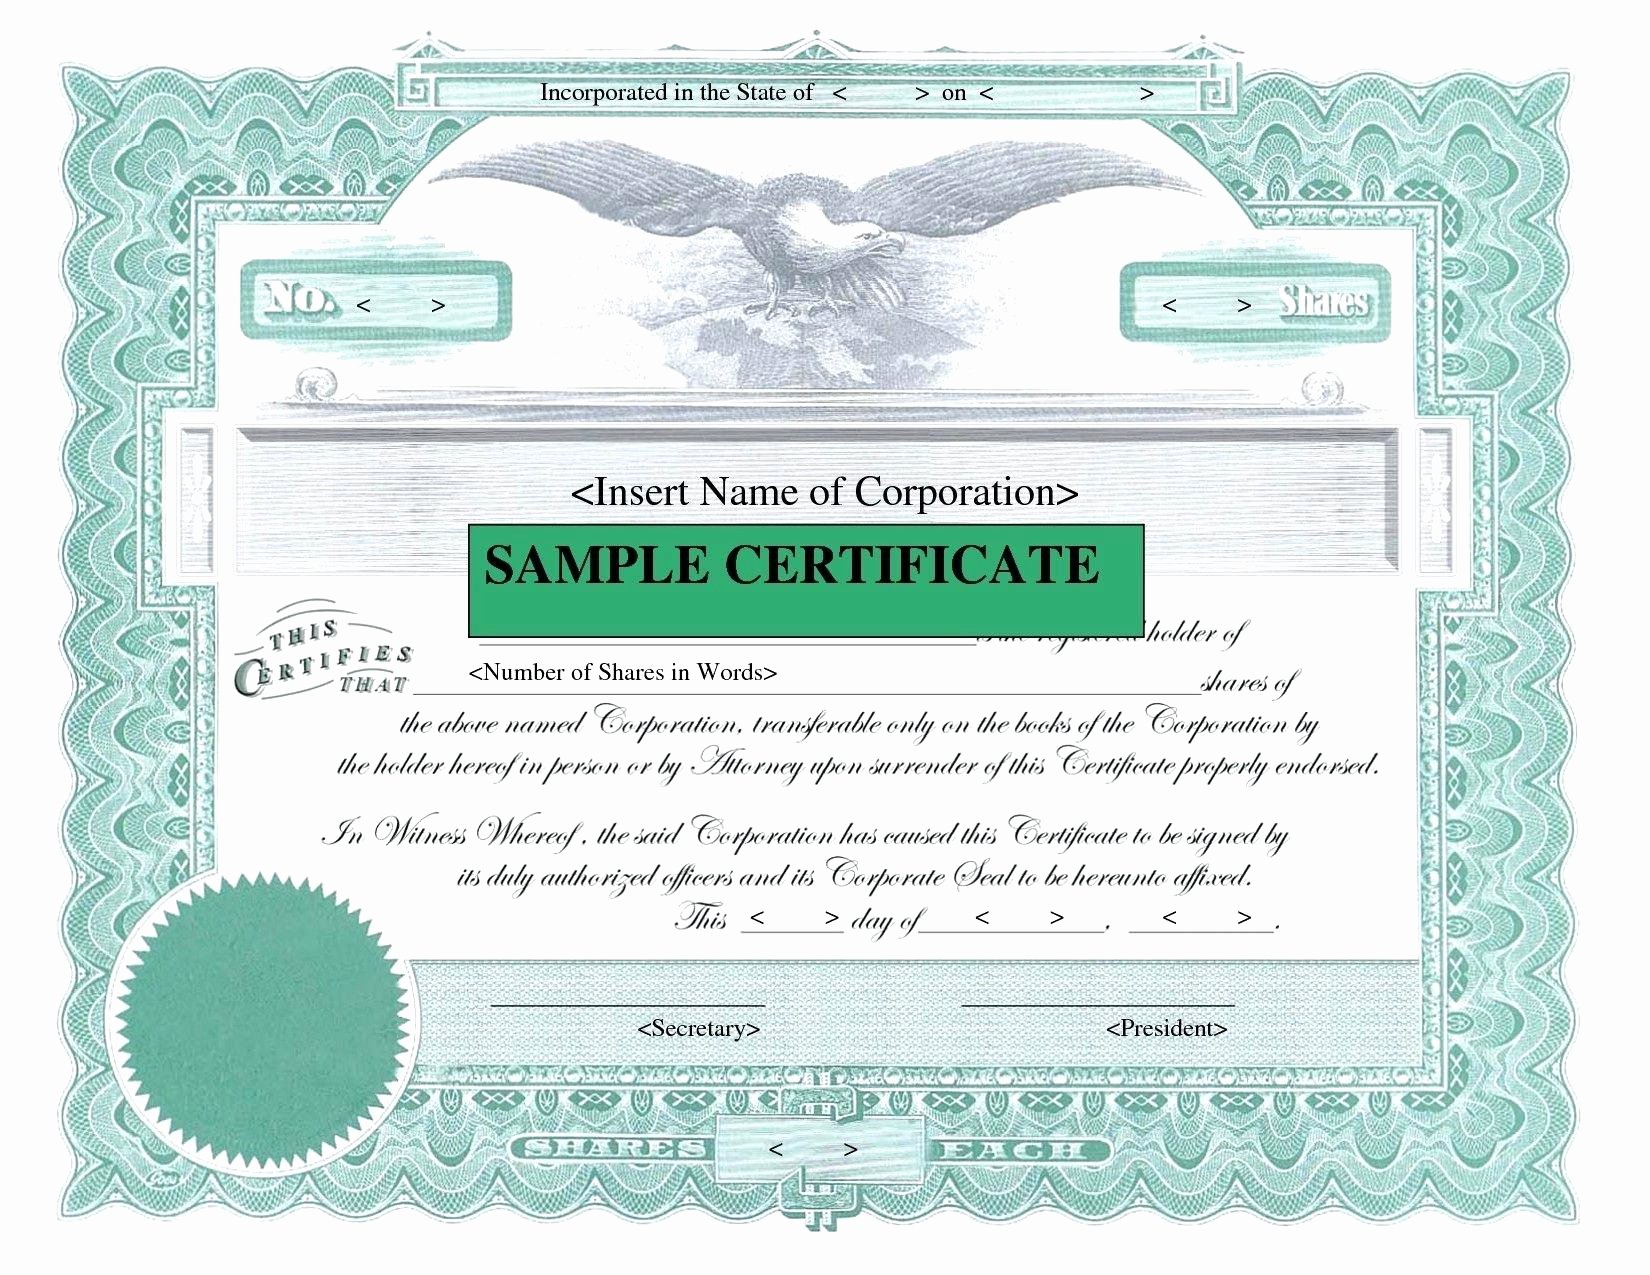 corpkit stock certificate template annual report filing services certificate of good standing new york second department